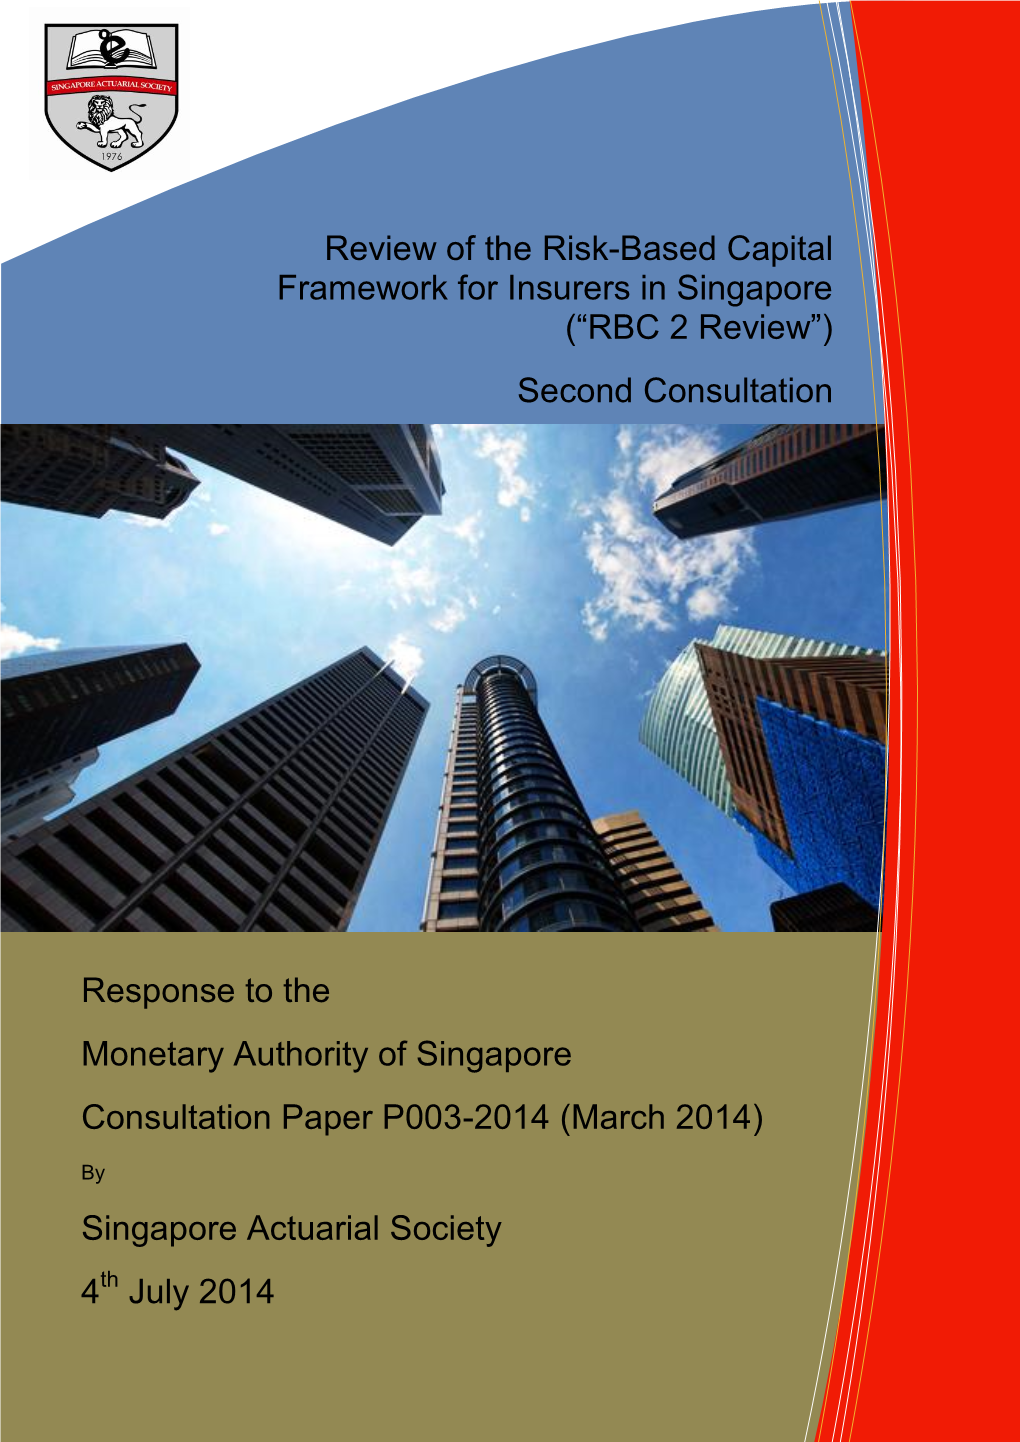 Response to the Monetary Authority of Singapore Consultation Paper P003-2014 (March 2014)